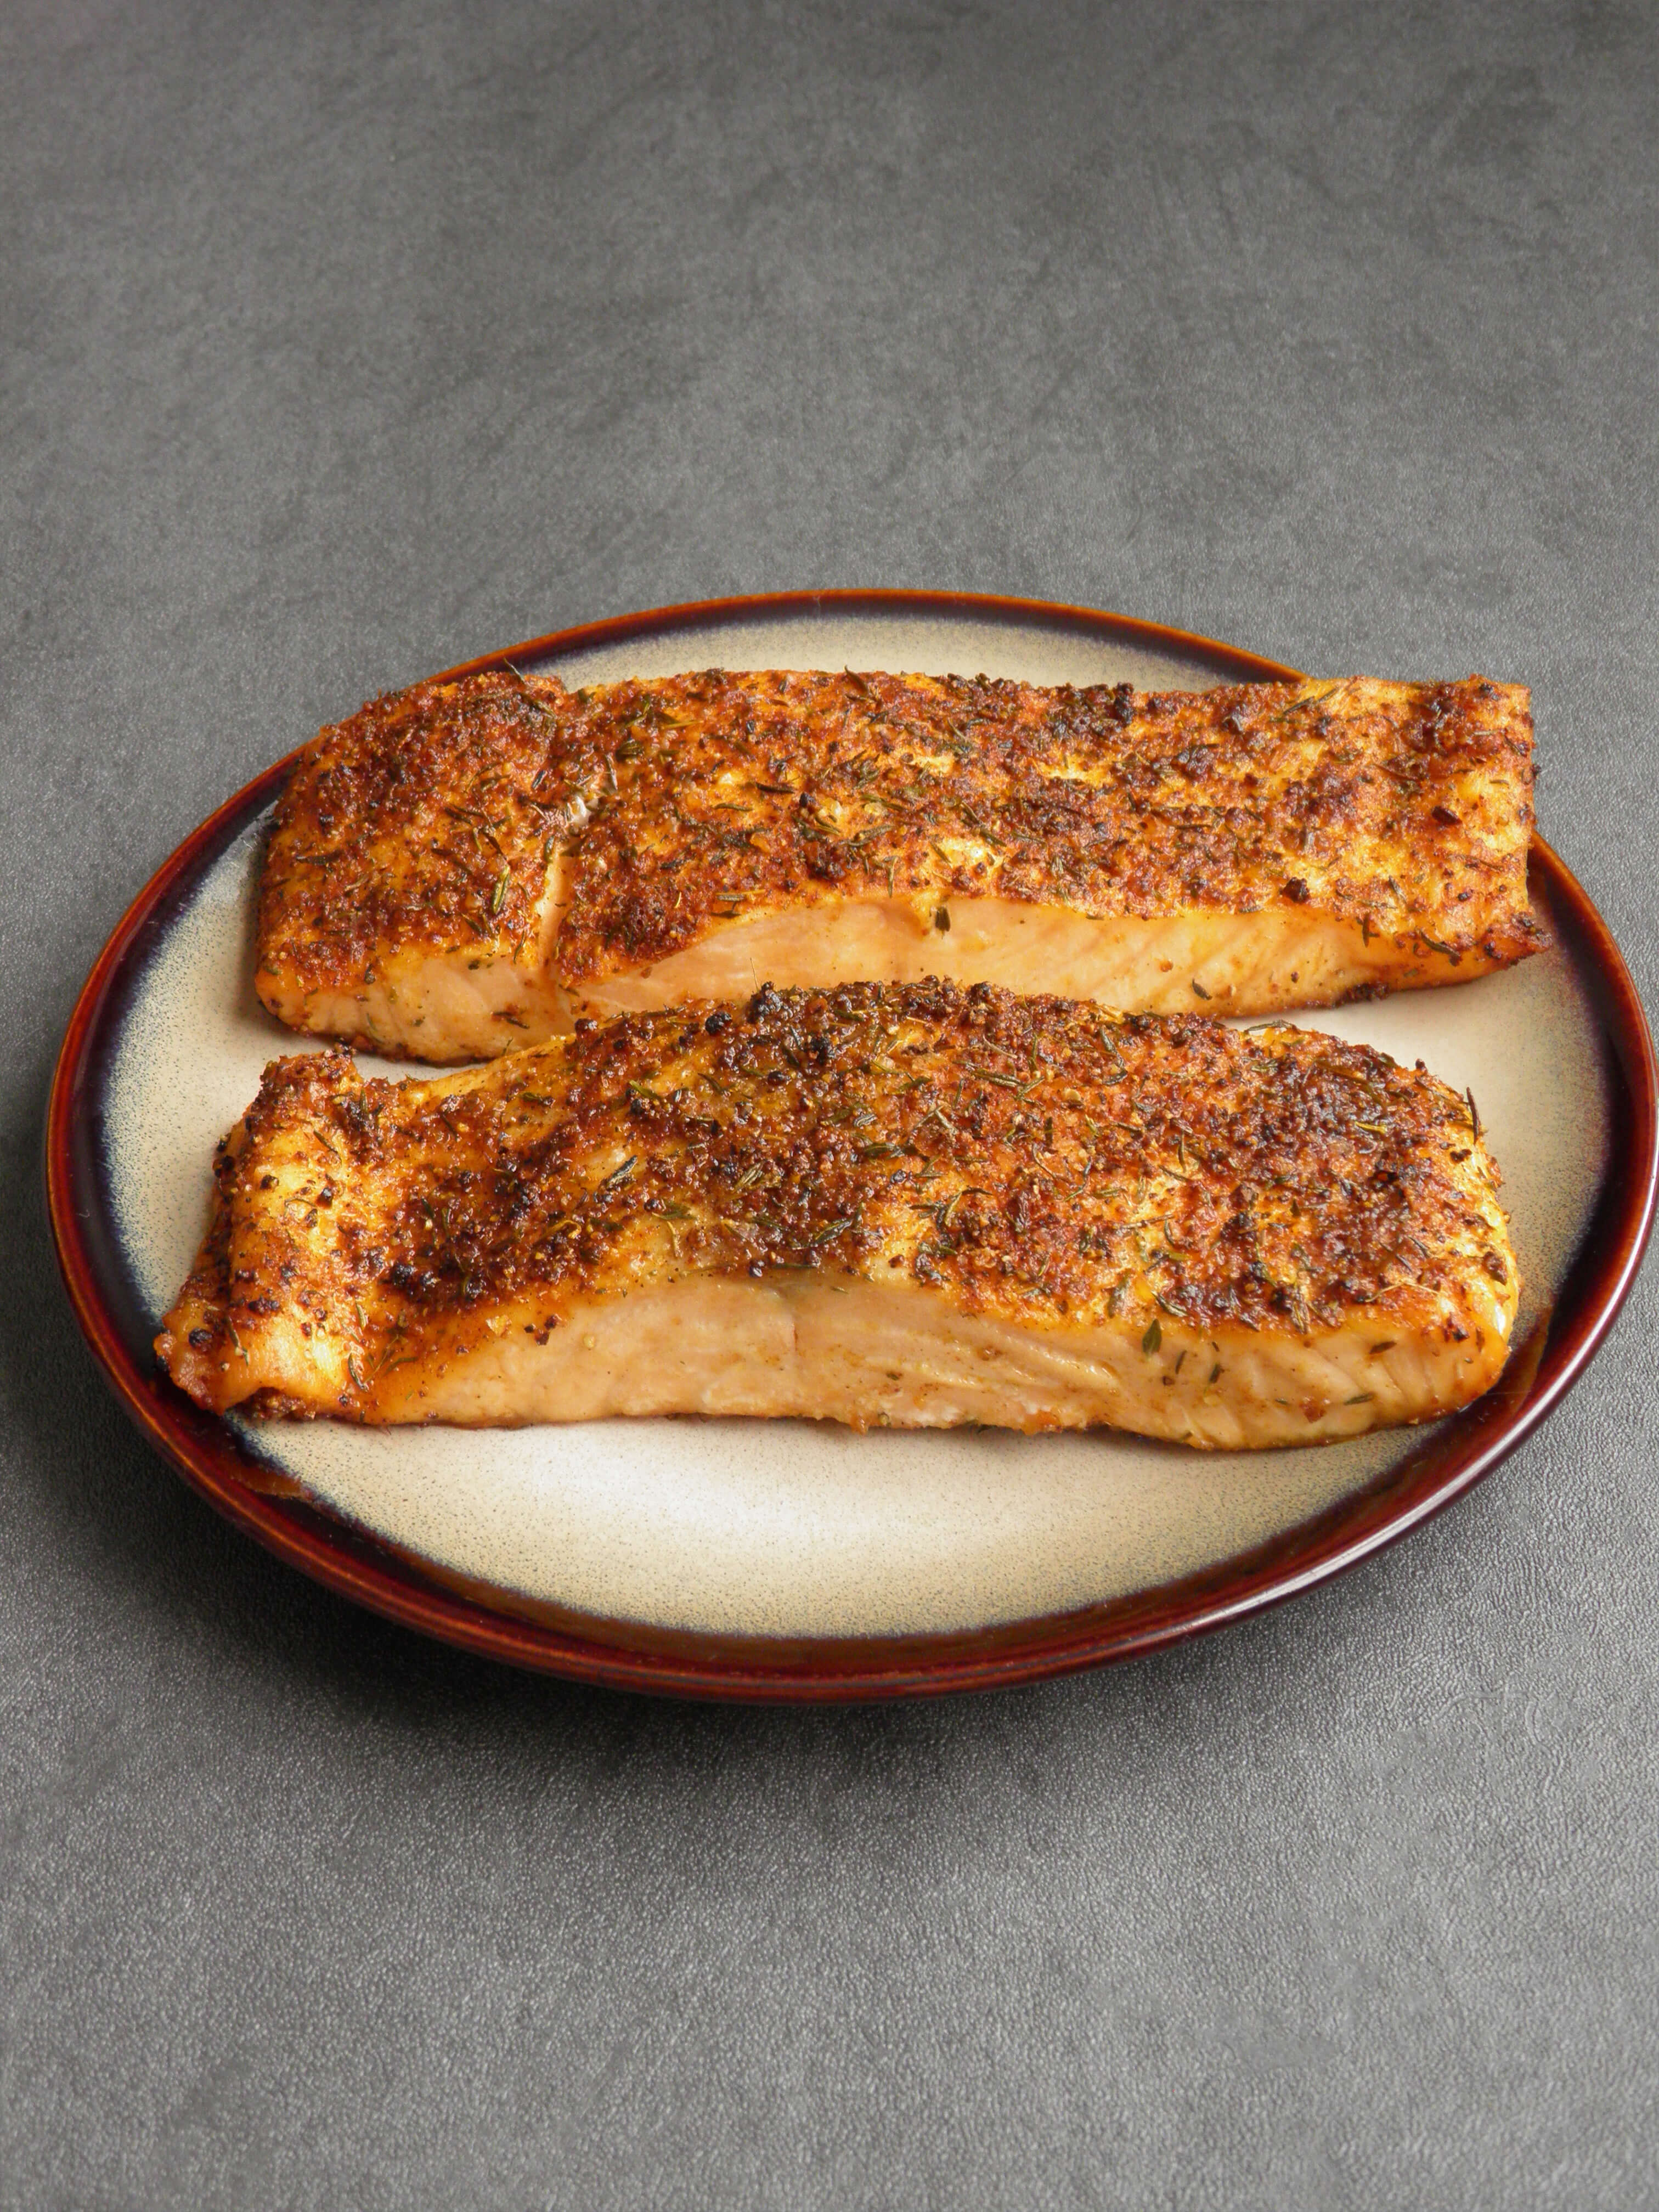 two herb crusted salmon filets on a plate